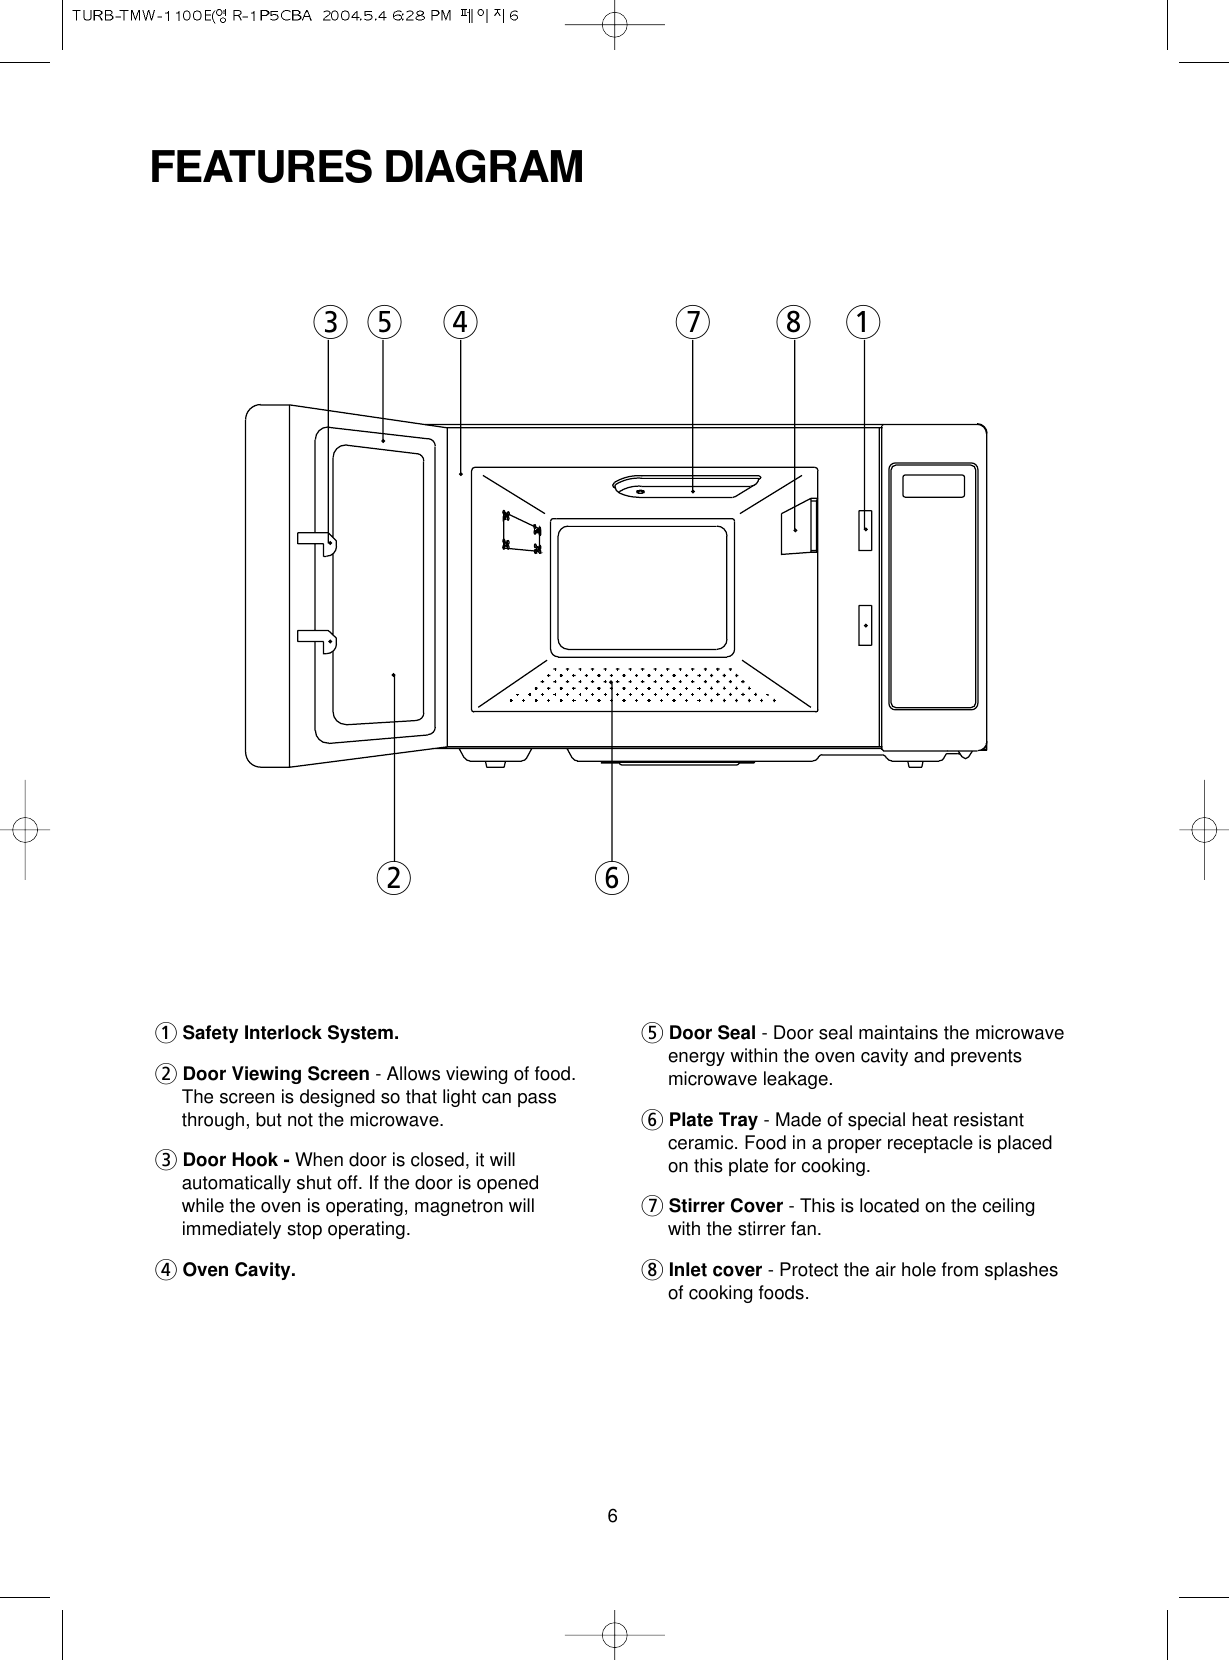 6FEATURES DIAGRAM1Safety Interlock System.2Door Viewing Screen - Allows viewing of food.The screen is designed so that light can passthrough, but not the microwave. 3Door Hook - When door is closed, it willautomatically shut off. If the door is openedwhile the oven is operating, magnetron willimmediately stop operating.4Oven Cavity.5Door Seal - Door seal maintains the microwaveenergy within the oven cavity and preventsmicrowave leakage.6Plate Tray - Made of special heat resistantceramic. Food in a proper receptacle is placedon this plate for cooking.7Stirrer Cover - This is located on the ceilingwith the stirrer fan.8Inlet cover - Protect the air hole from splashesof cooking foods.  35264781